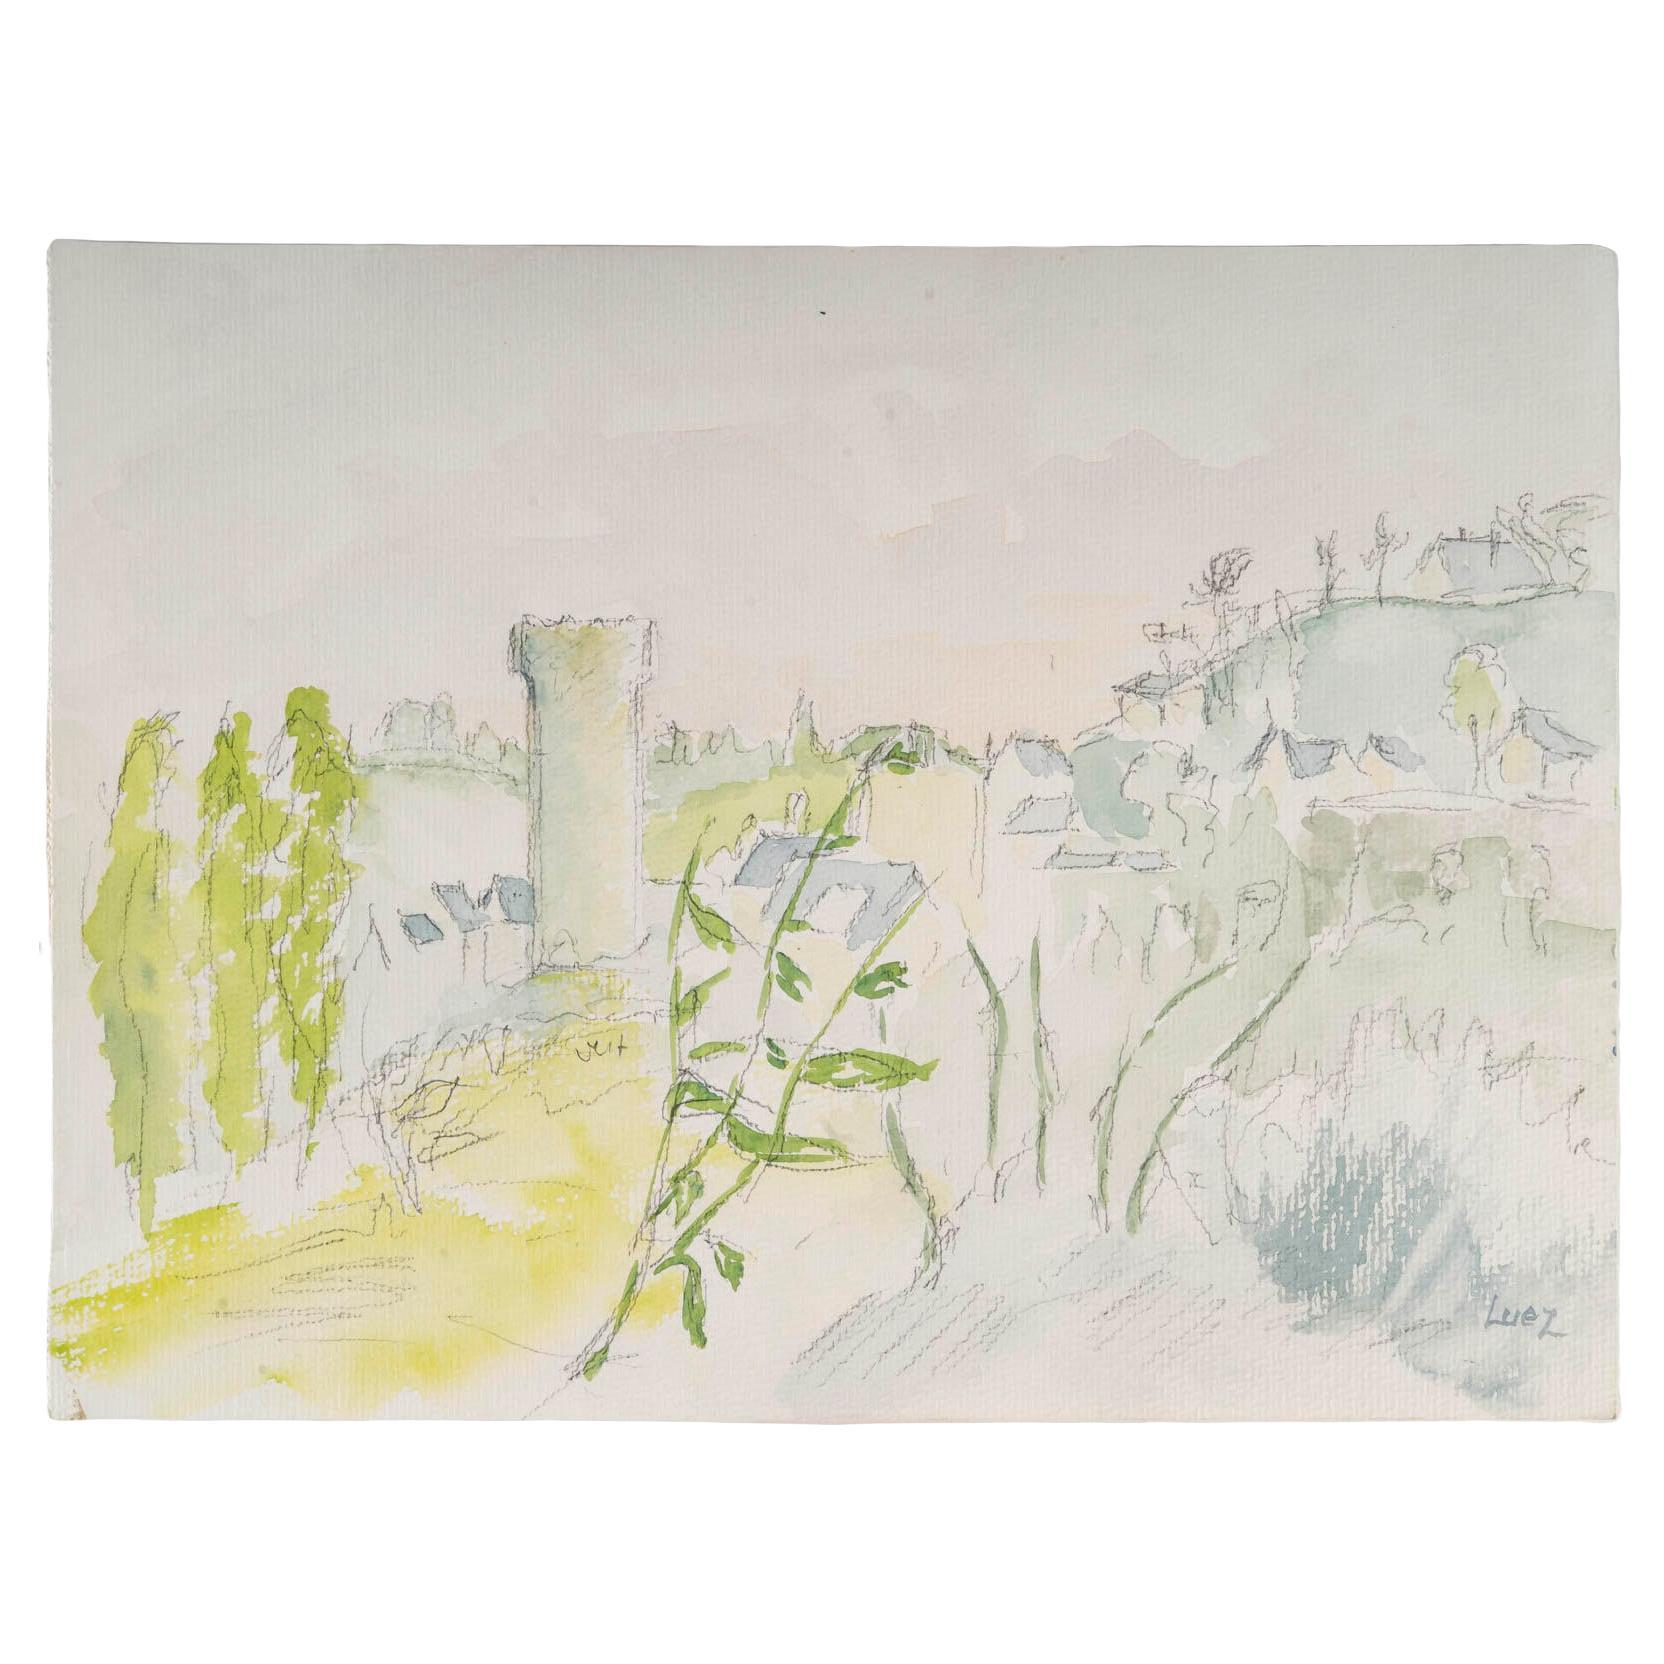 Watercolour on Paper by Evelyne Luez, 1960-1970.